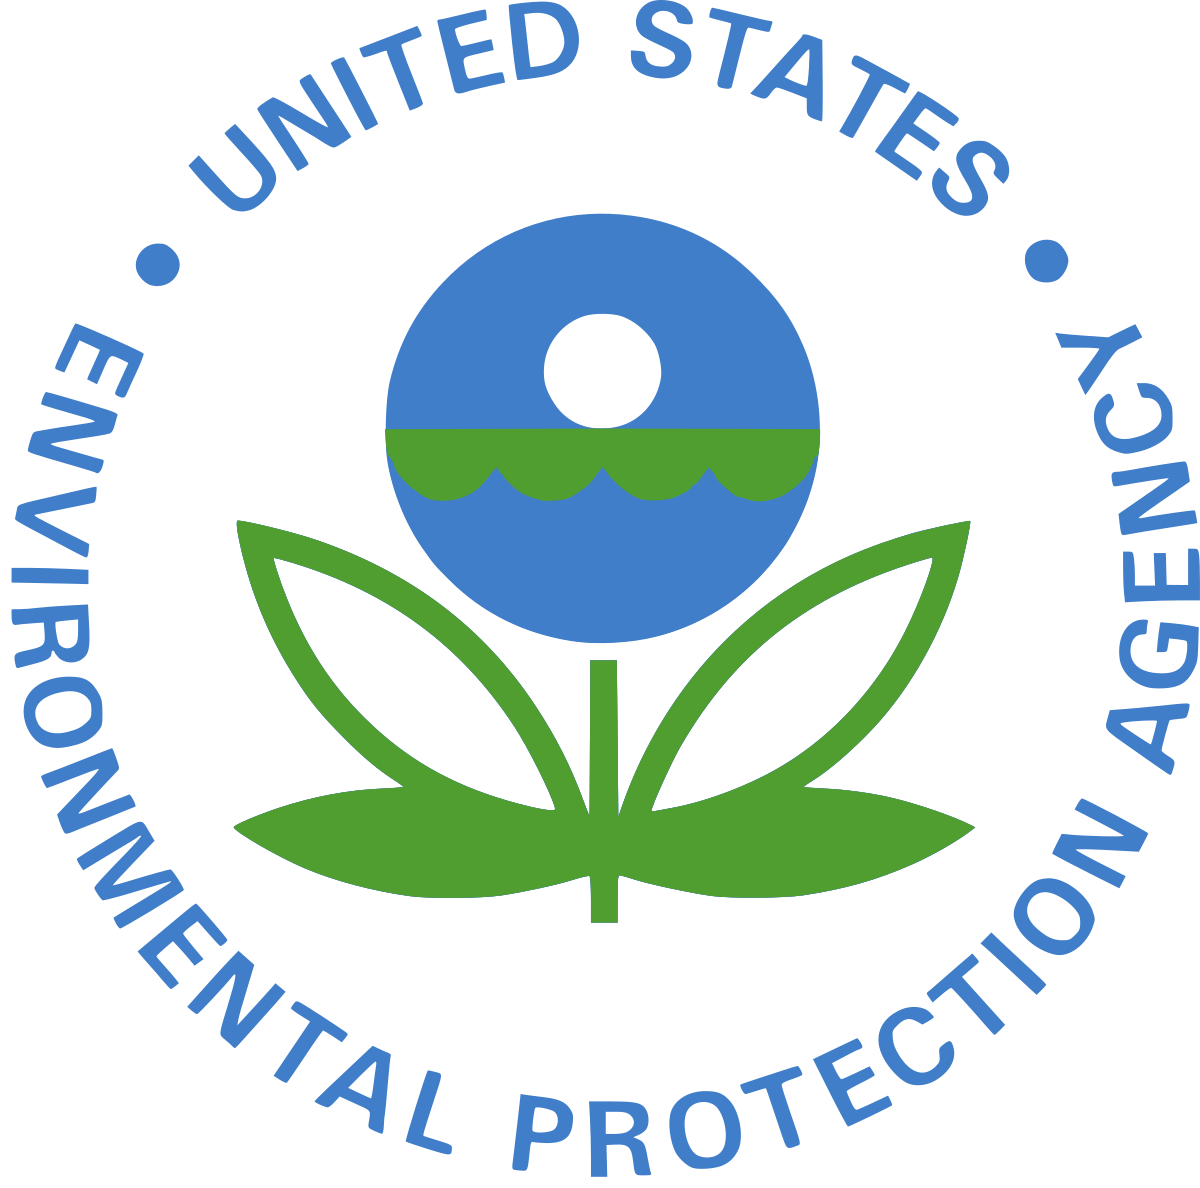 USEPA Proposes Guidance to Support Water Affordability & Clean Water Act Implementation